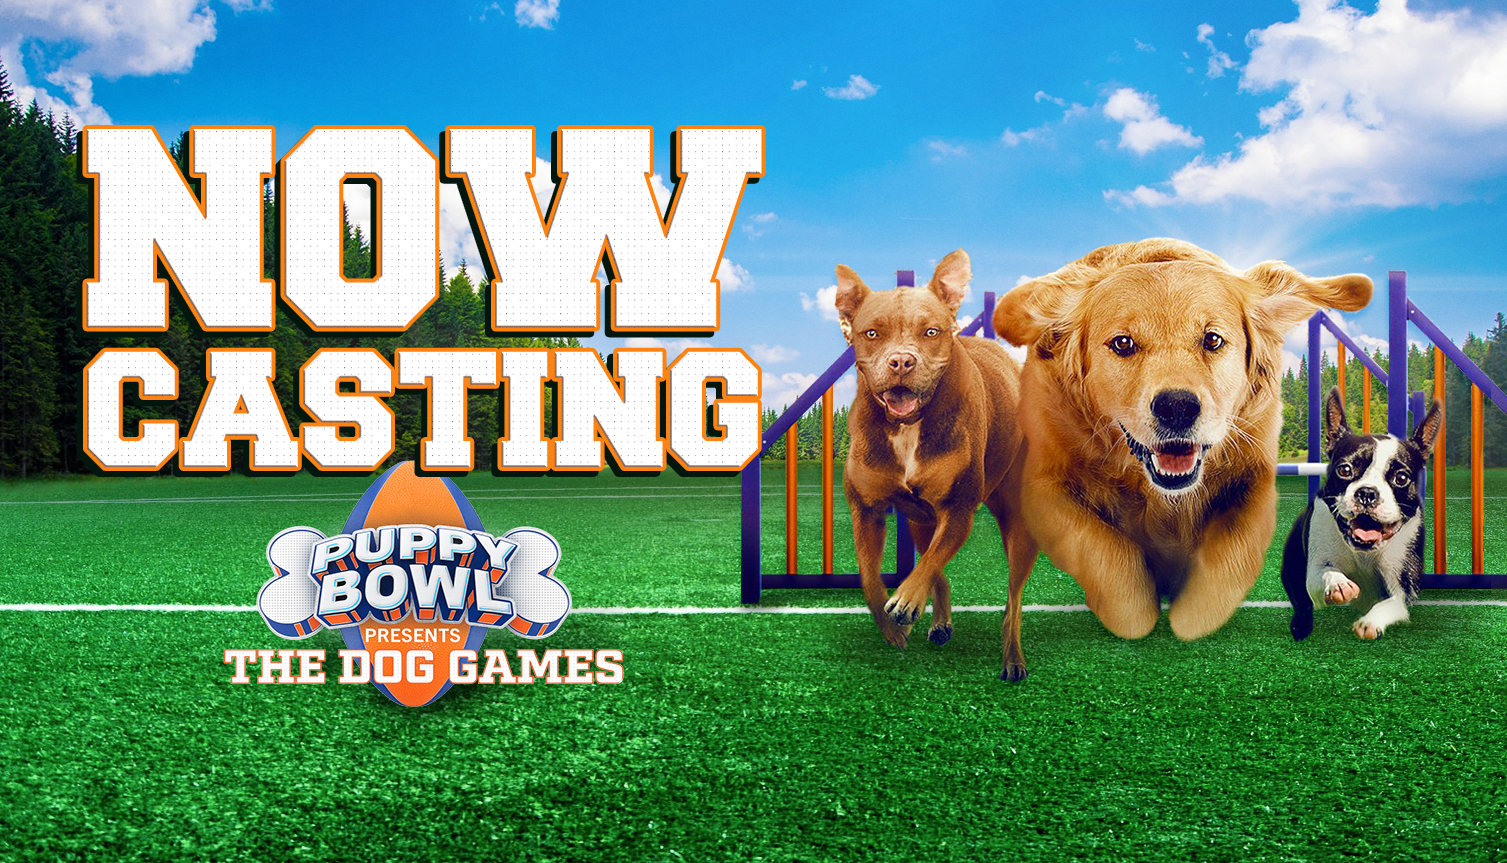 Now Casting Dog Owners and Trainers with Talented Pooches for the New Competition Series “Puppy Bowl Presents: The Dog Games”!